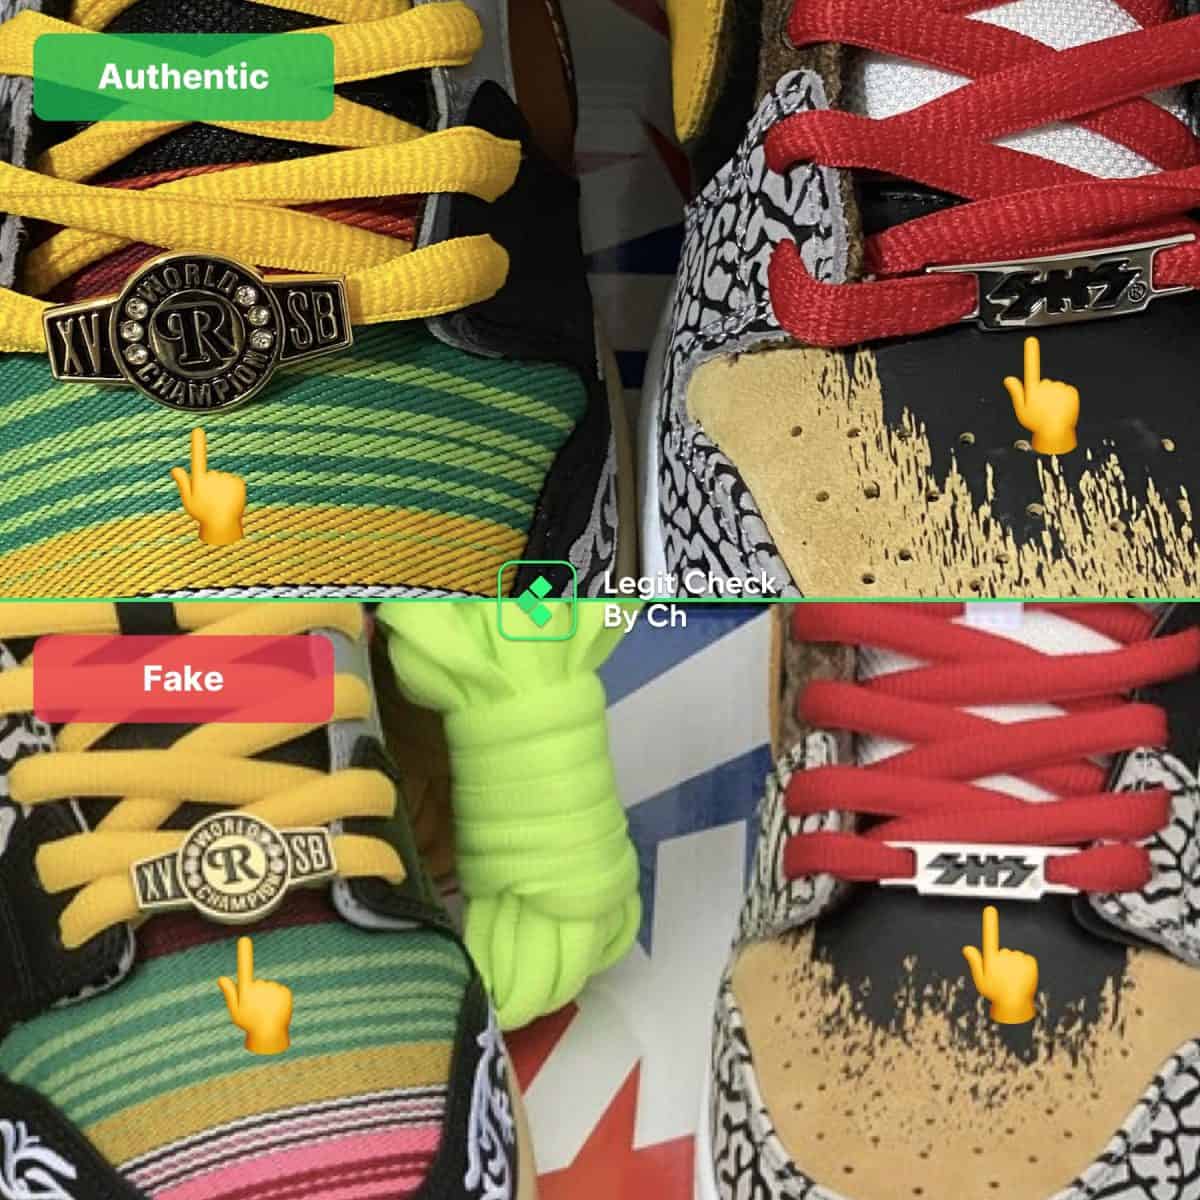 how to spot fake what the paul dunks